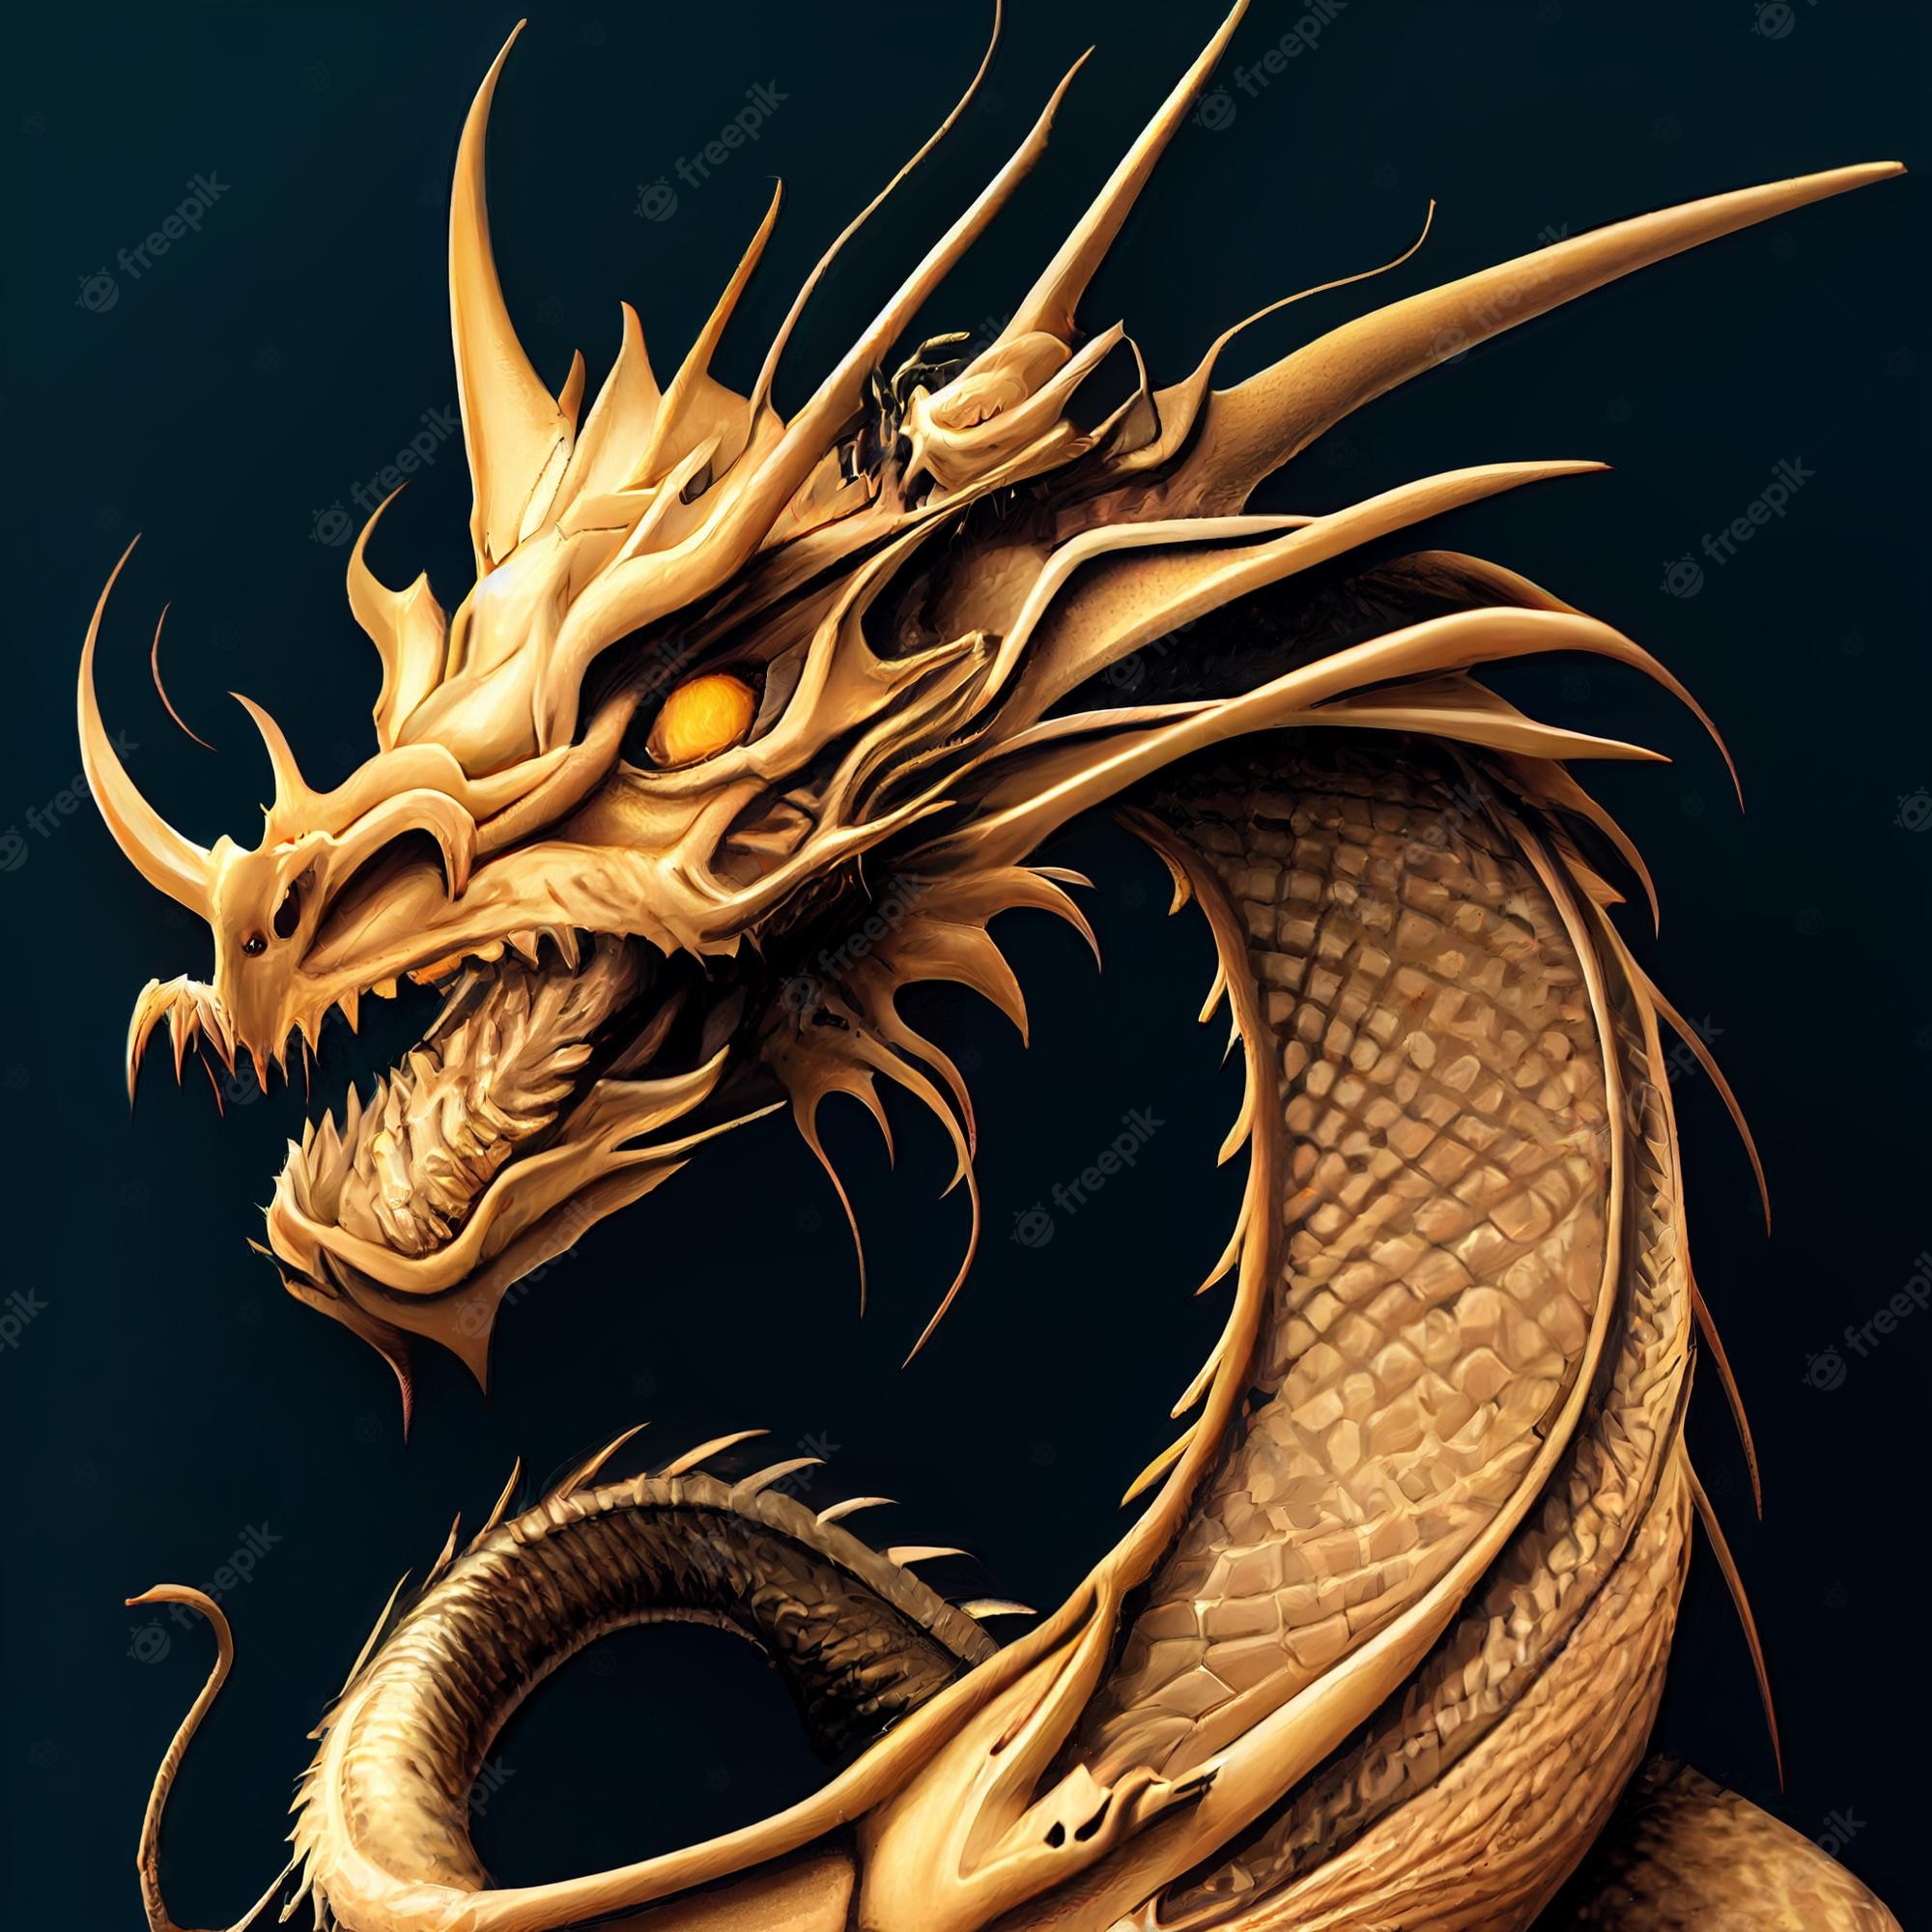 Gold Dragon Wallpapers